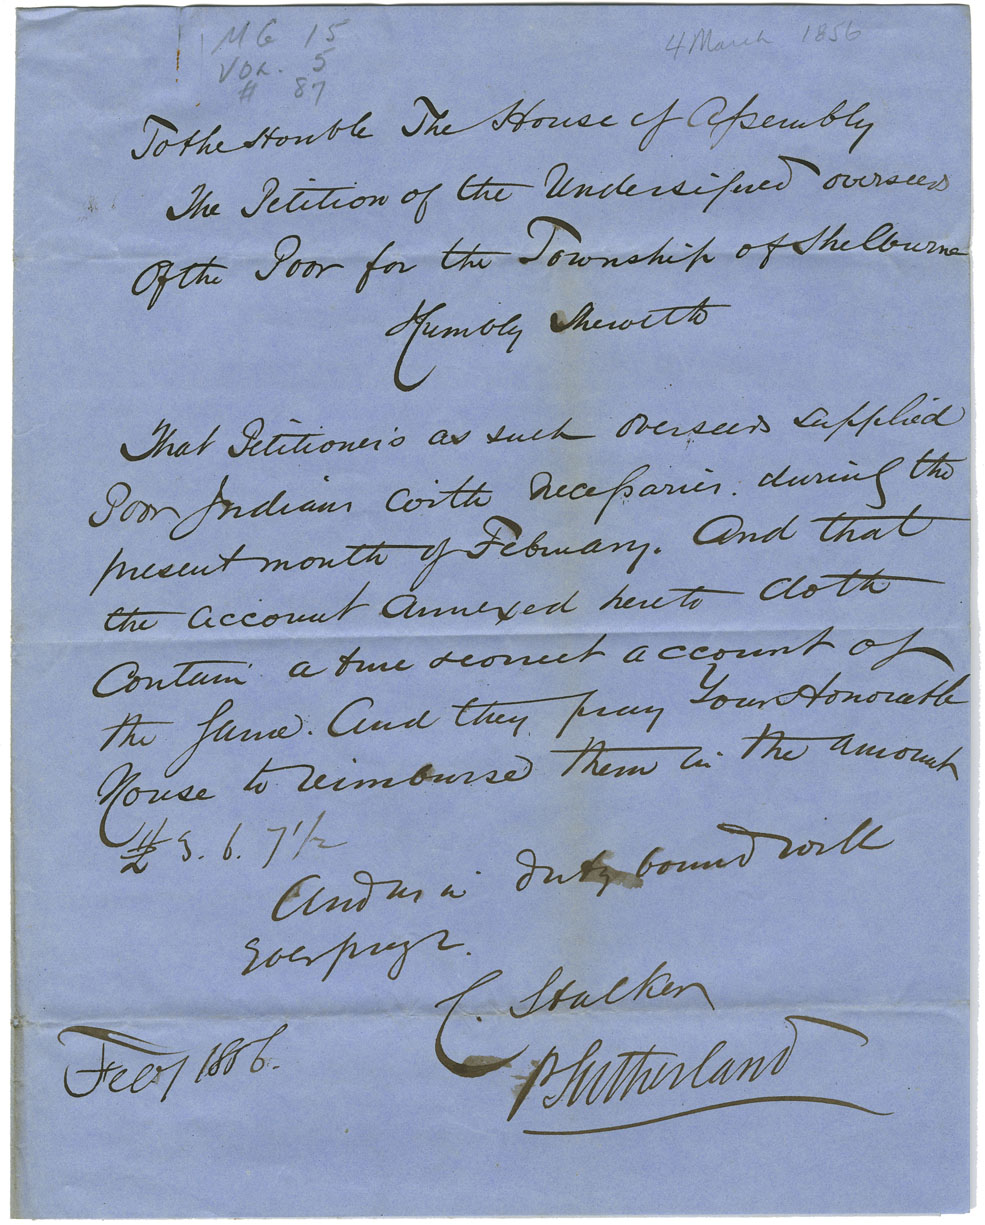 Petition of Overseers of the Poor for Shelburne requesting payment for supplies given to Mi'kmaq.